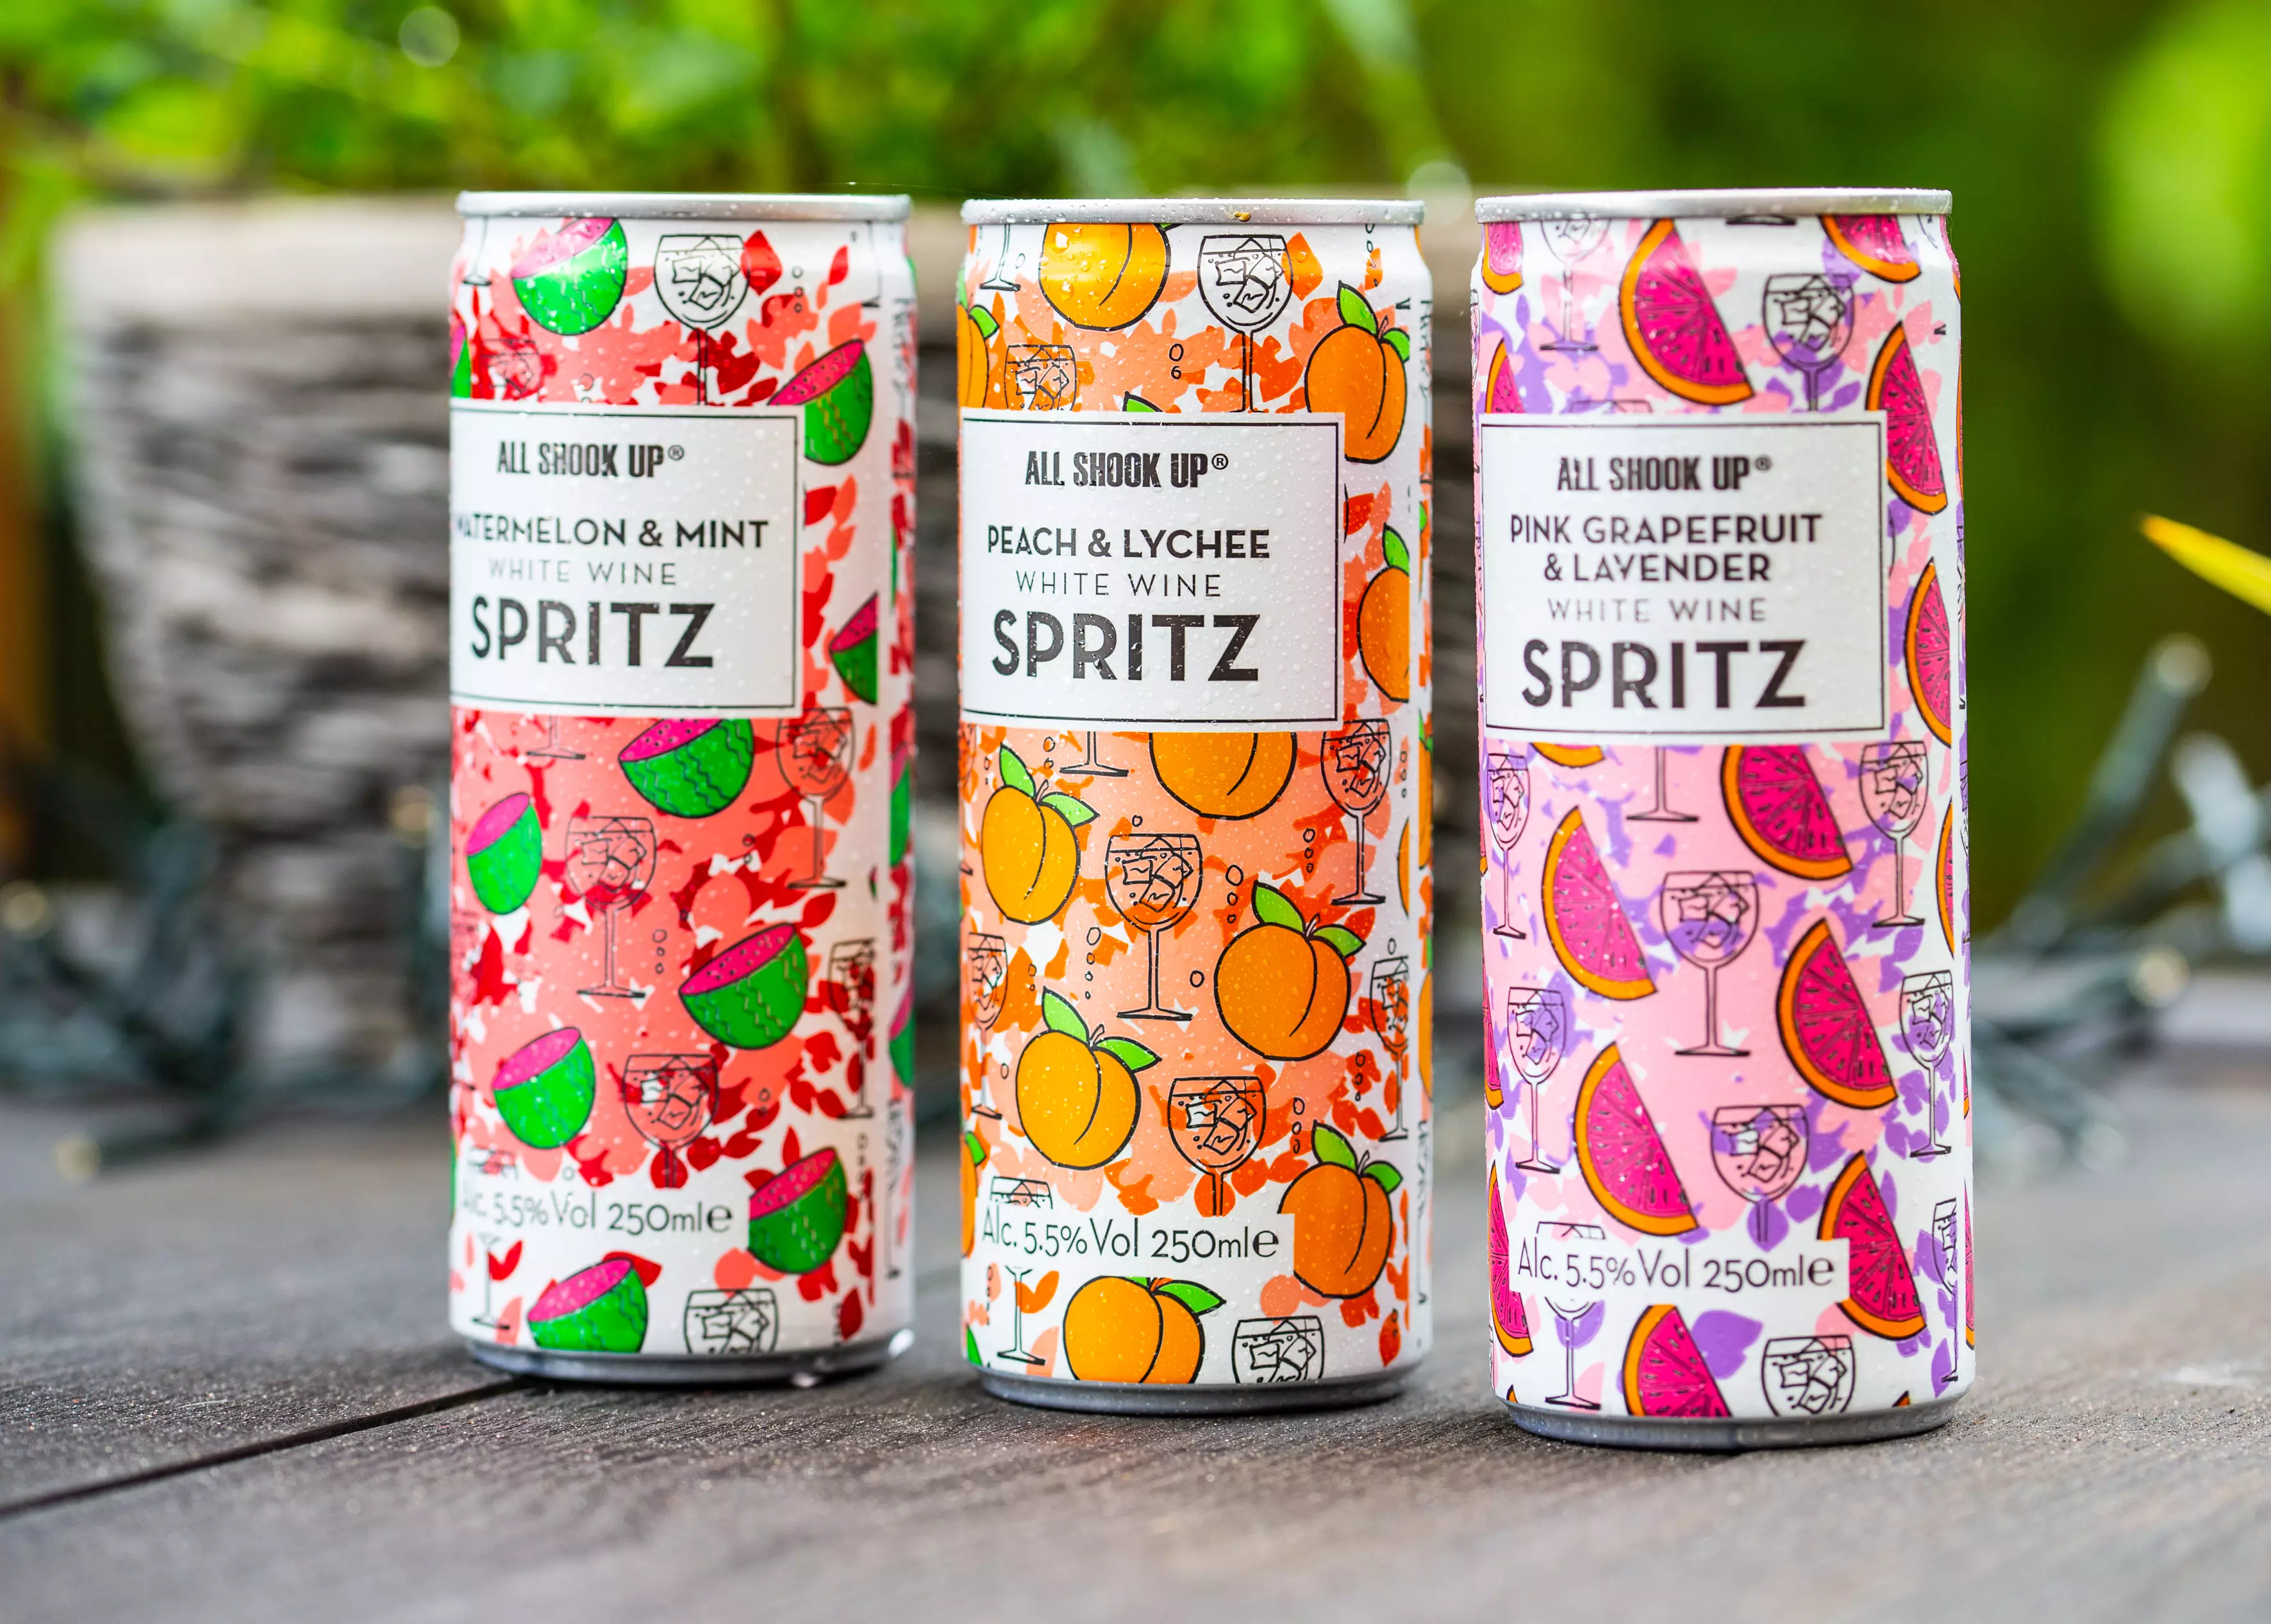 The cans come in three fruity flavours (